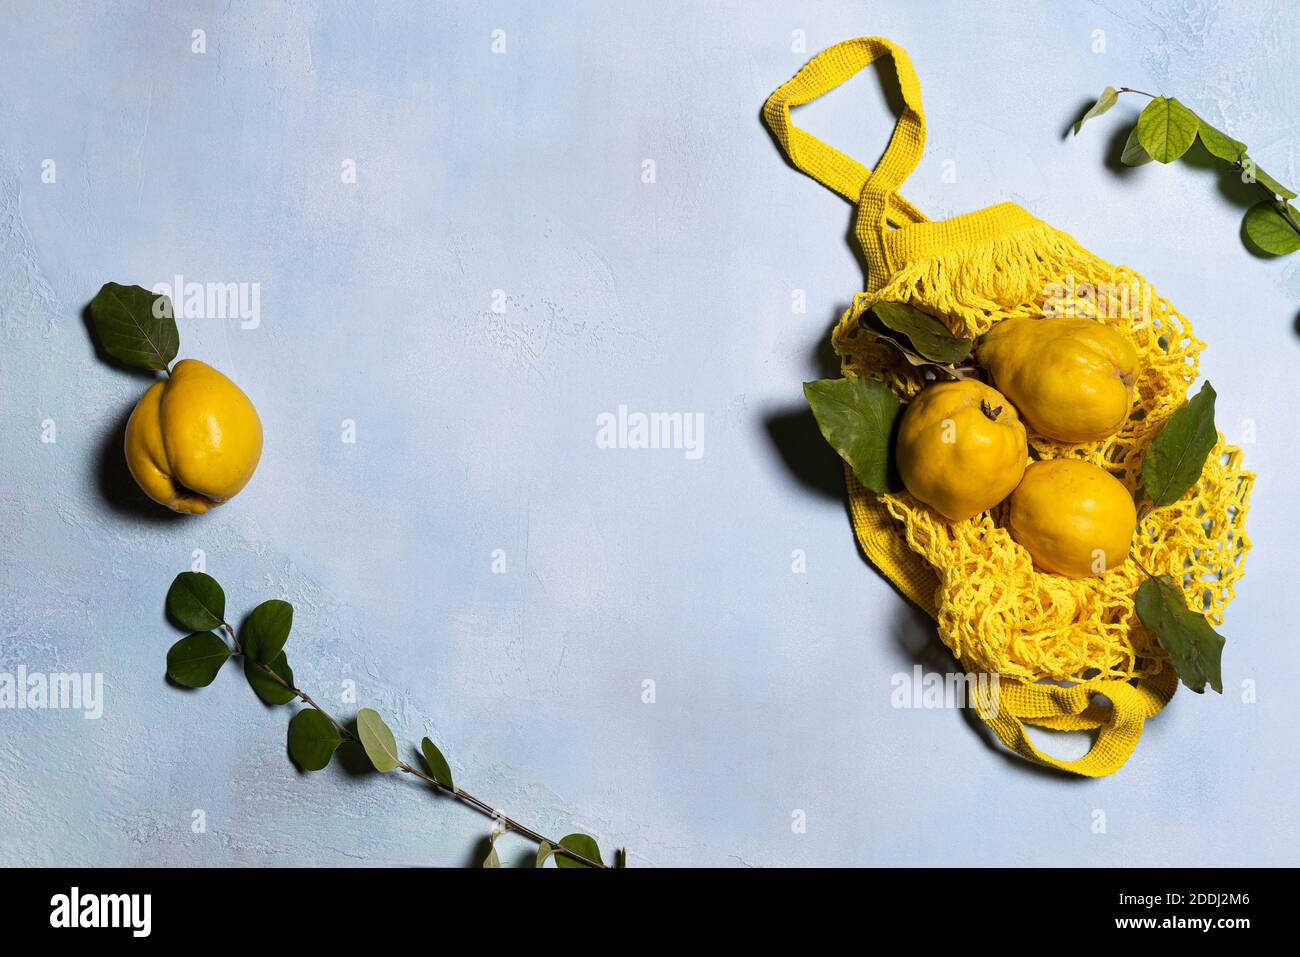 Ripe quince apples on yellow mesh bag and tree branches on blue background. Directly above view. Fruits and leaves have natural imperfections, spots a Stock Photo